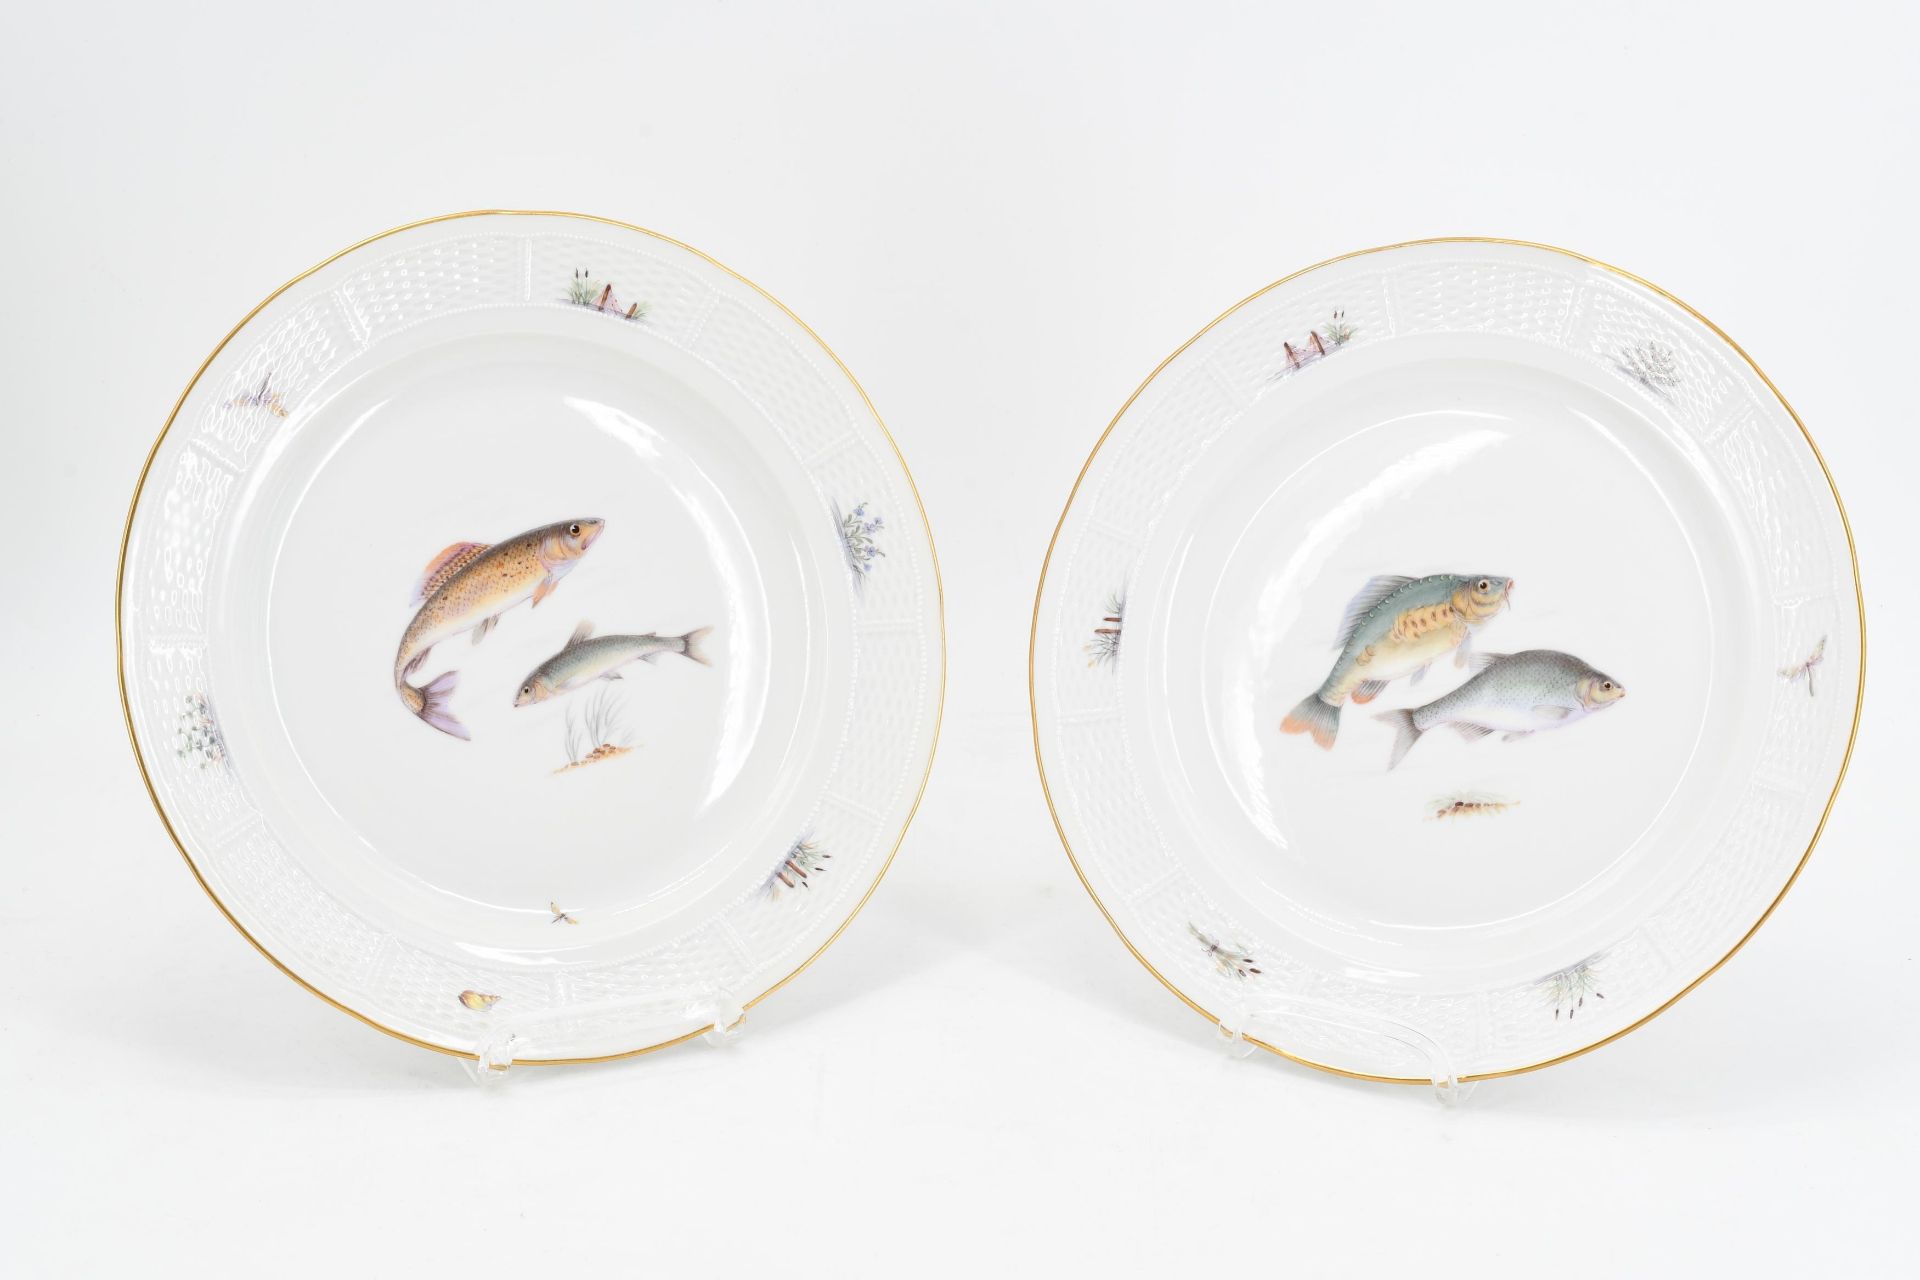 Dinner service with fish decor for 6 persons - Image 8 of 27